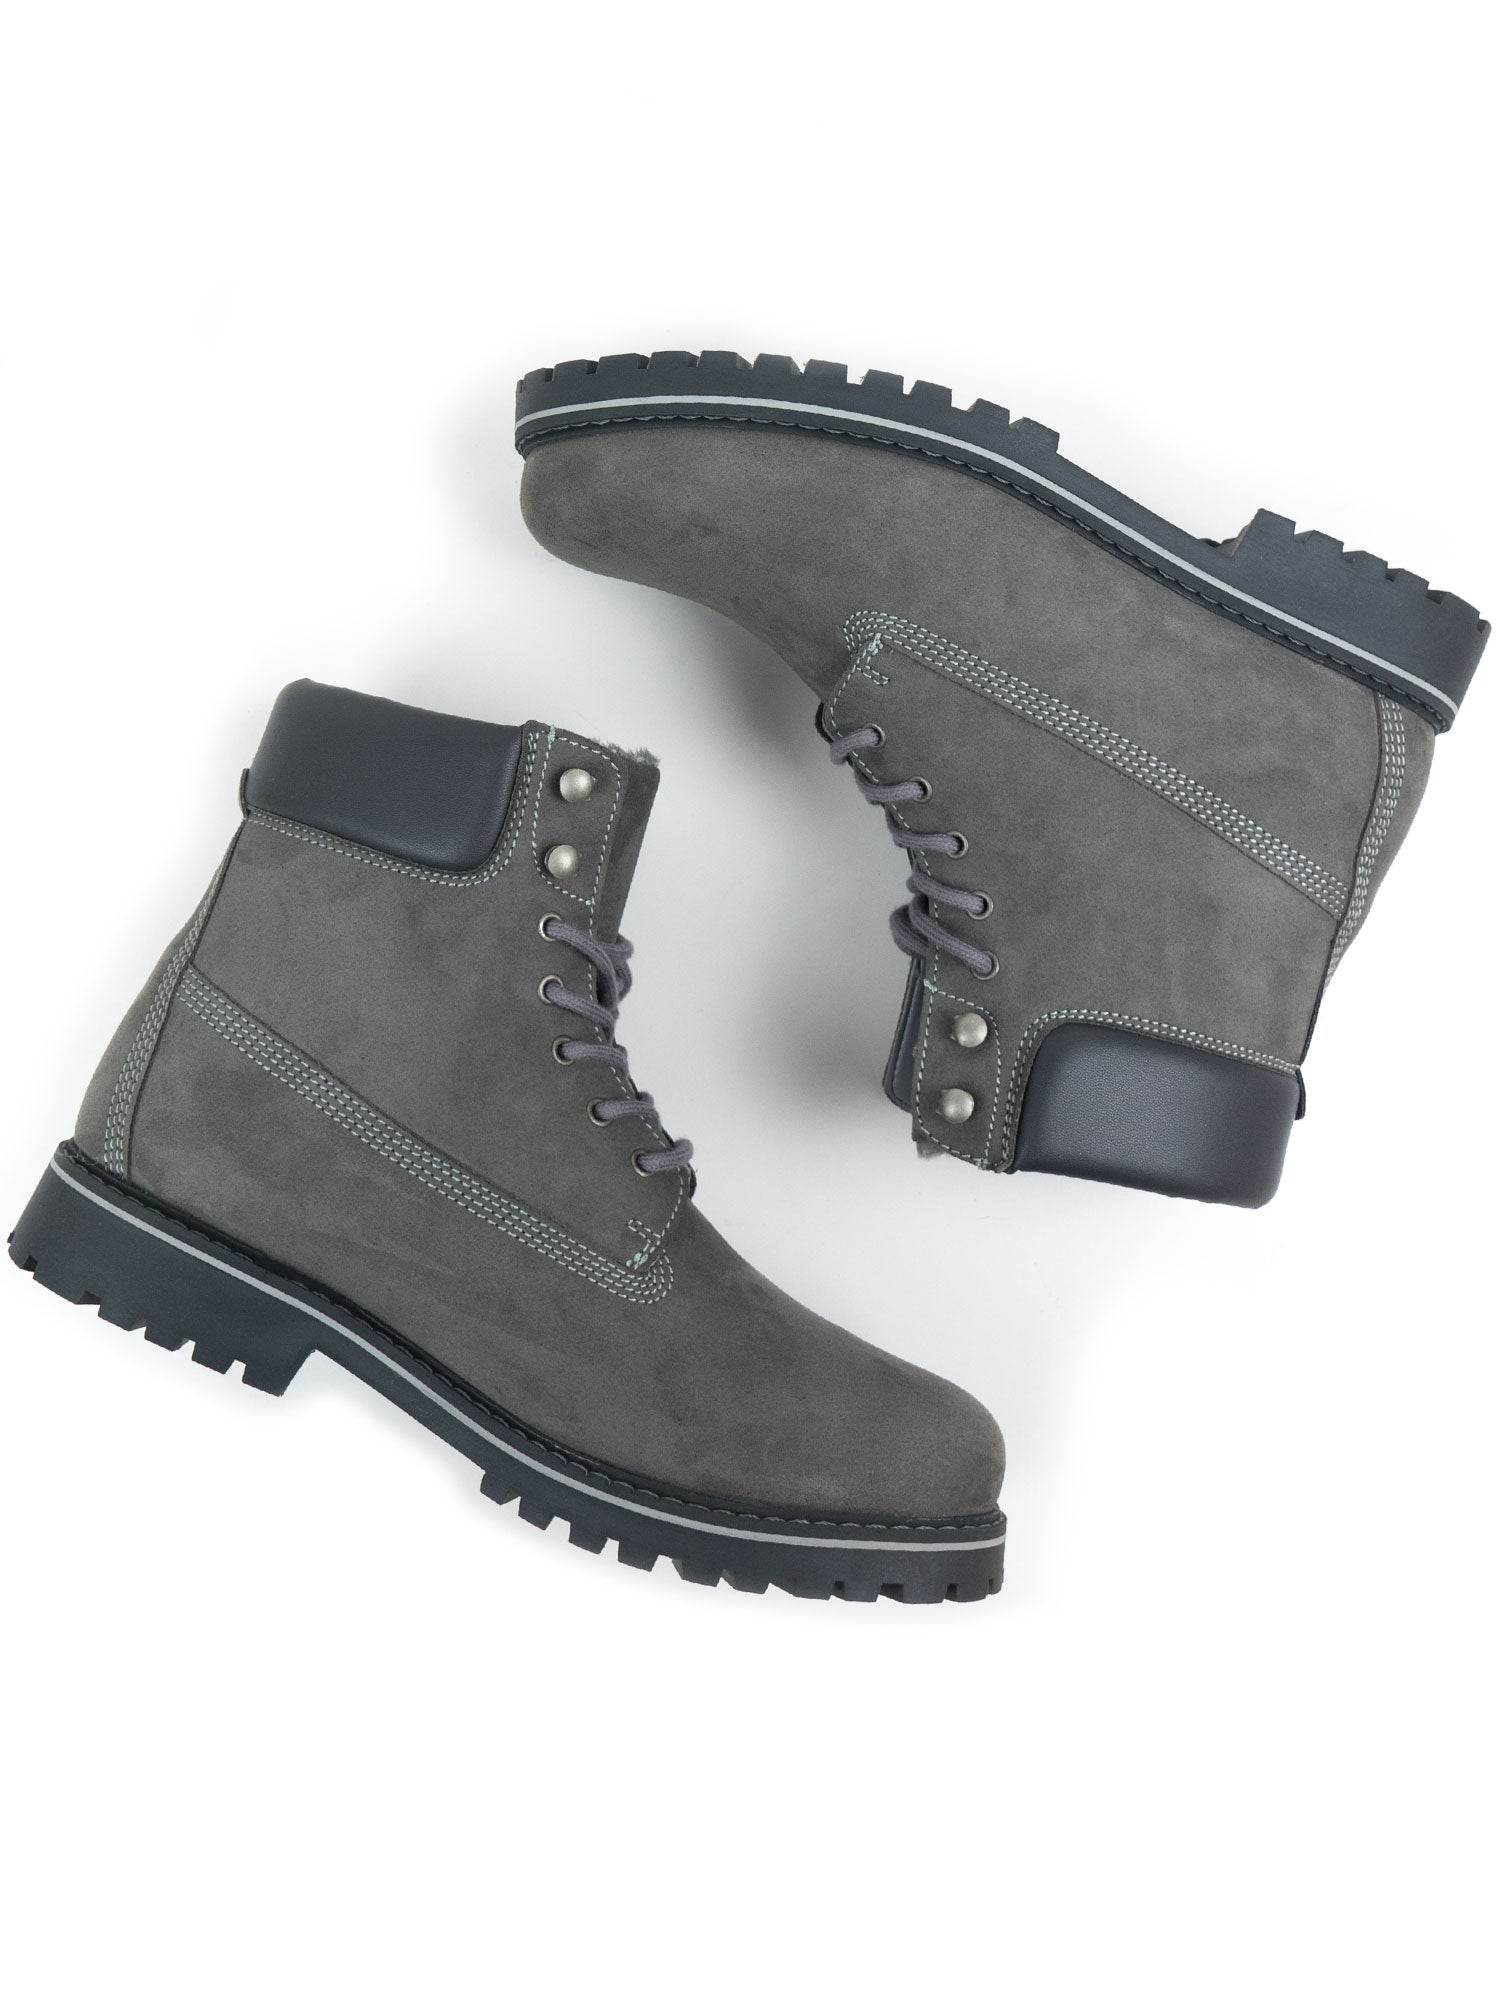 Will's Vegan Store Insulated Dock Boots